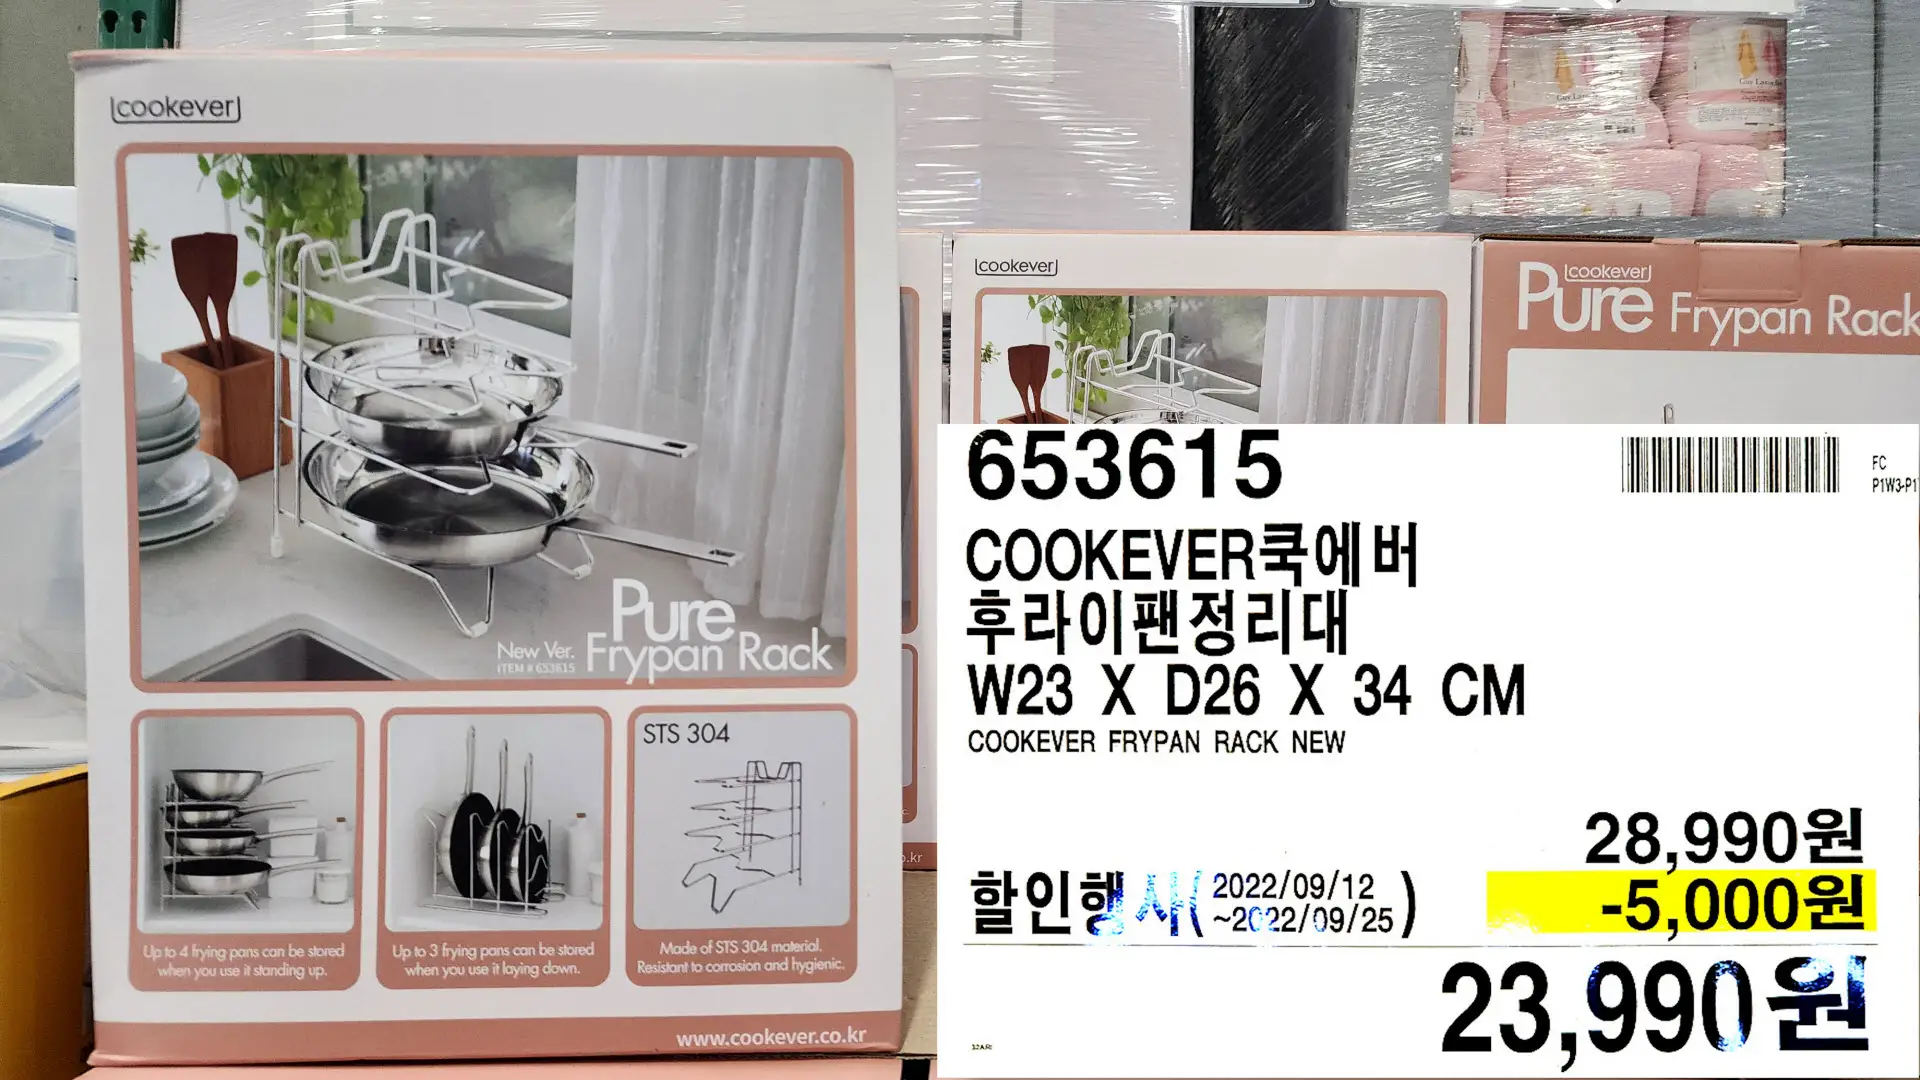 COOKEVER쿡에버
후라이팬정리대
W23 X D26 X 34 CM
COOKEVER FRYPAN RACK NEW
23&#44;990원